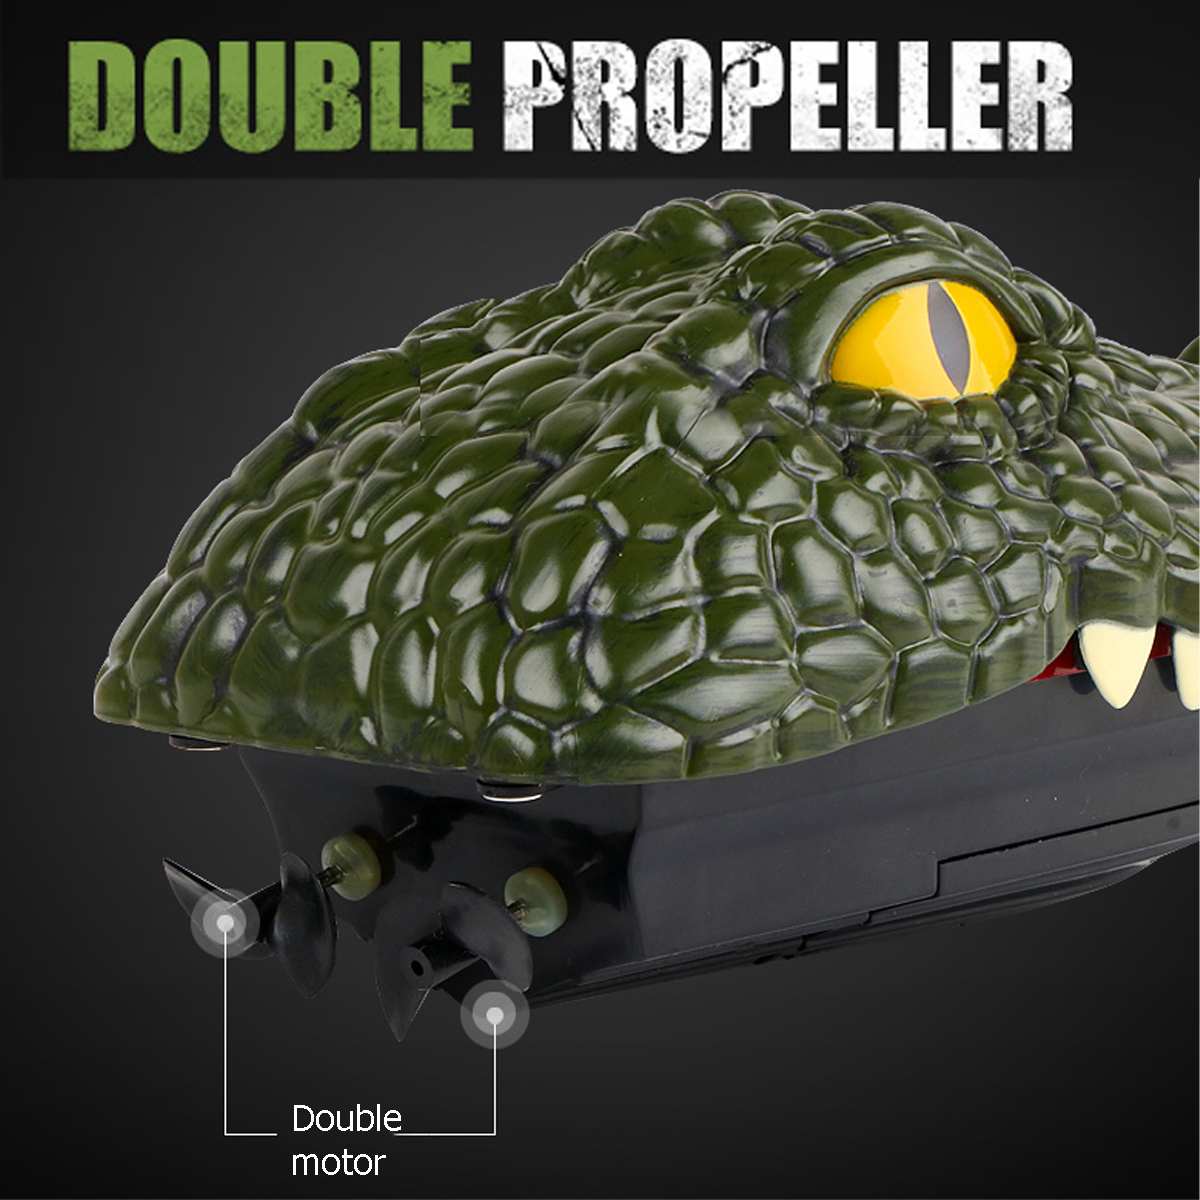 Crocodile RC Boat 2.4G Remote Control Electric Racing Boat Waterproof Simulation Crocodile Head Prank Toy Kids Party Horror Toys